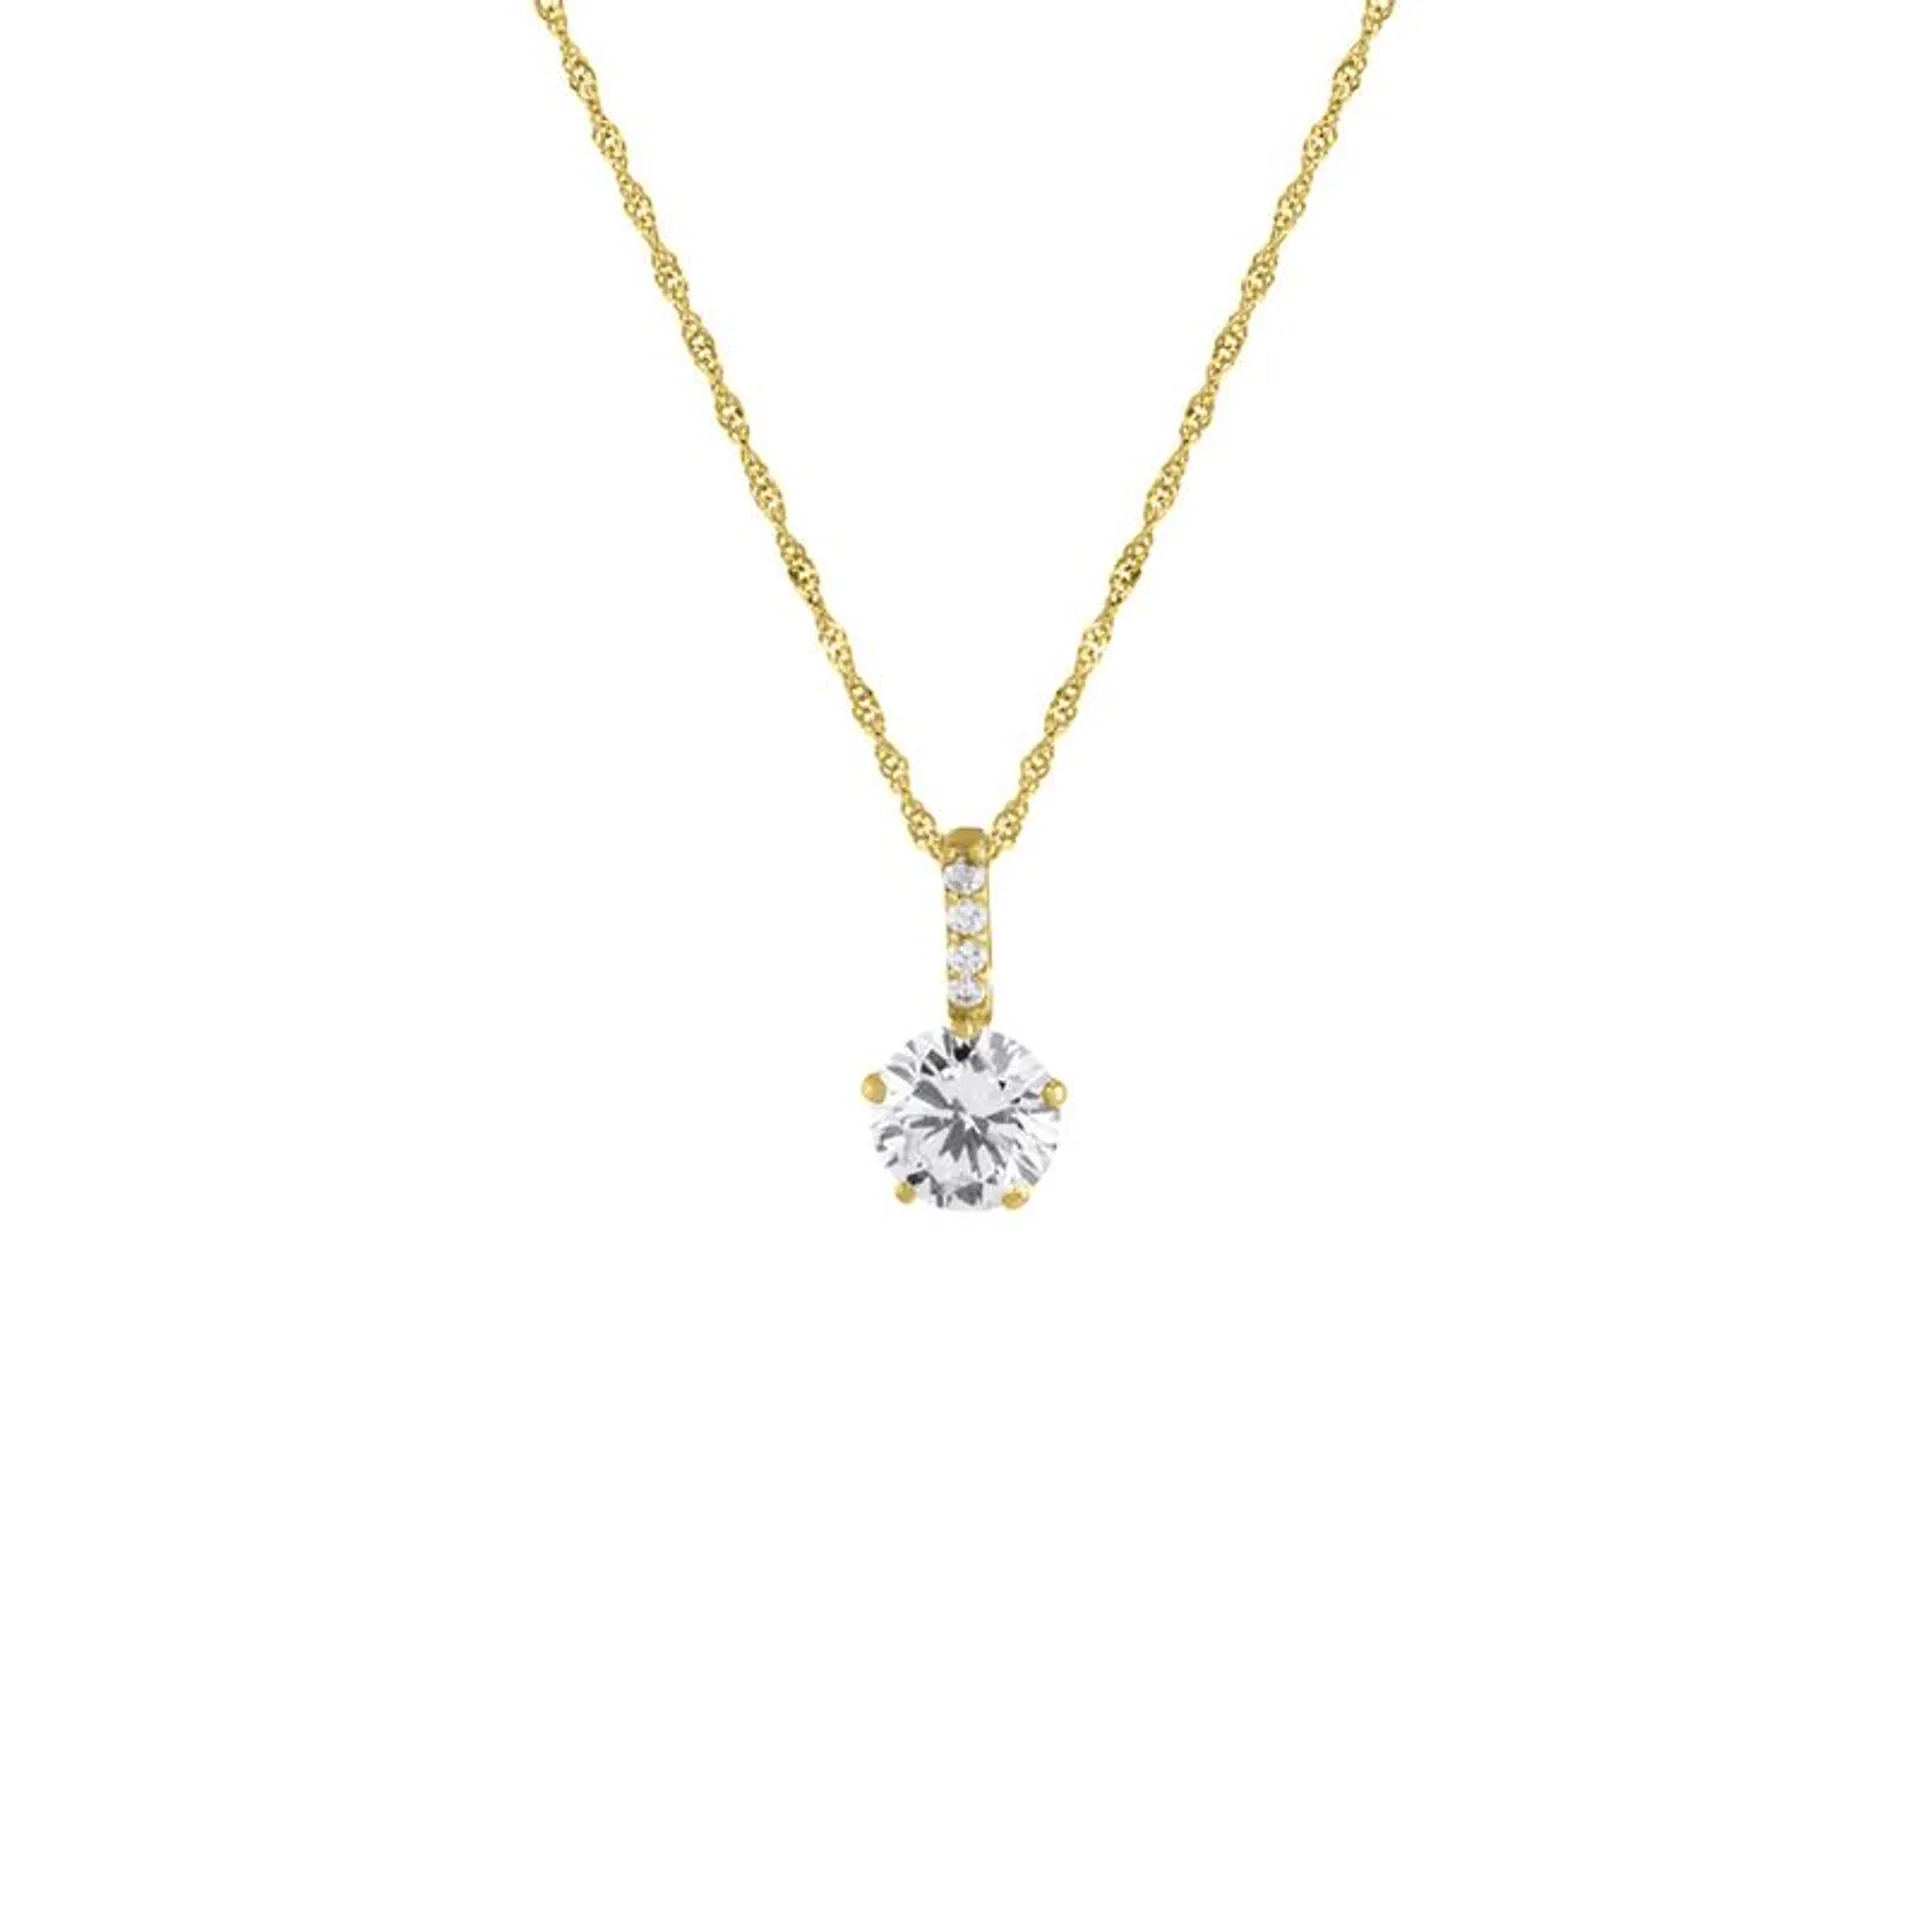 9ct Gold Cubic Zirconia Bale Solitaire Pendant on a Silver/Gold Chain